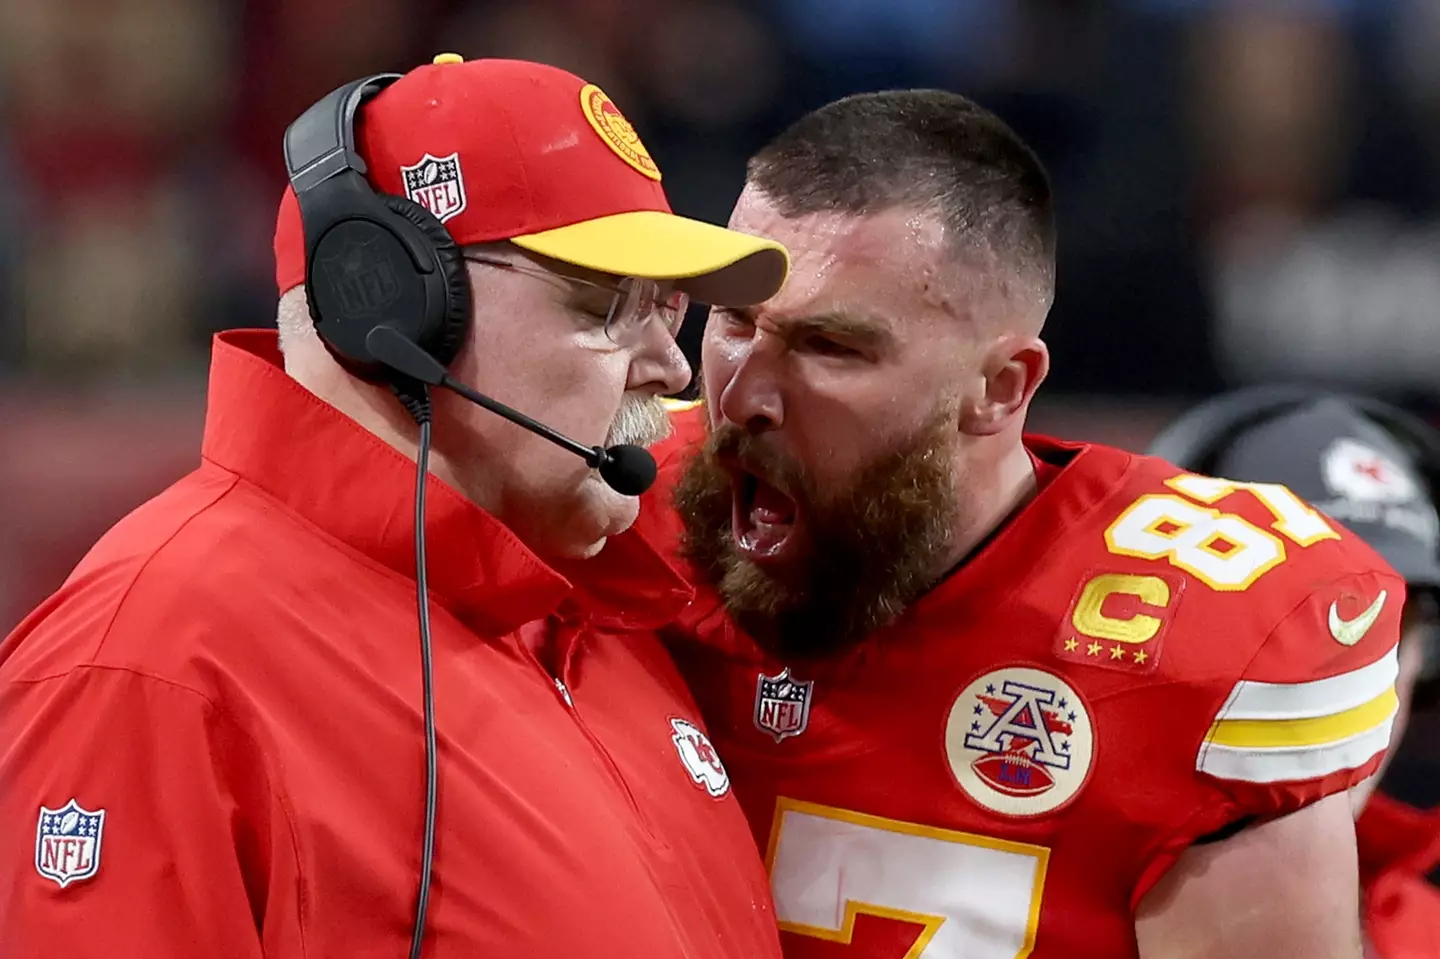 Kelce has been widely criticised for the incident (Getty)